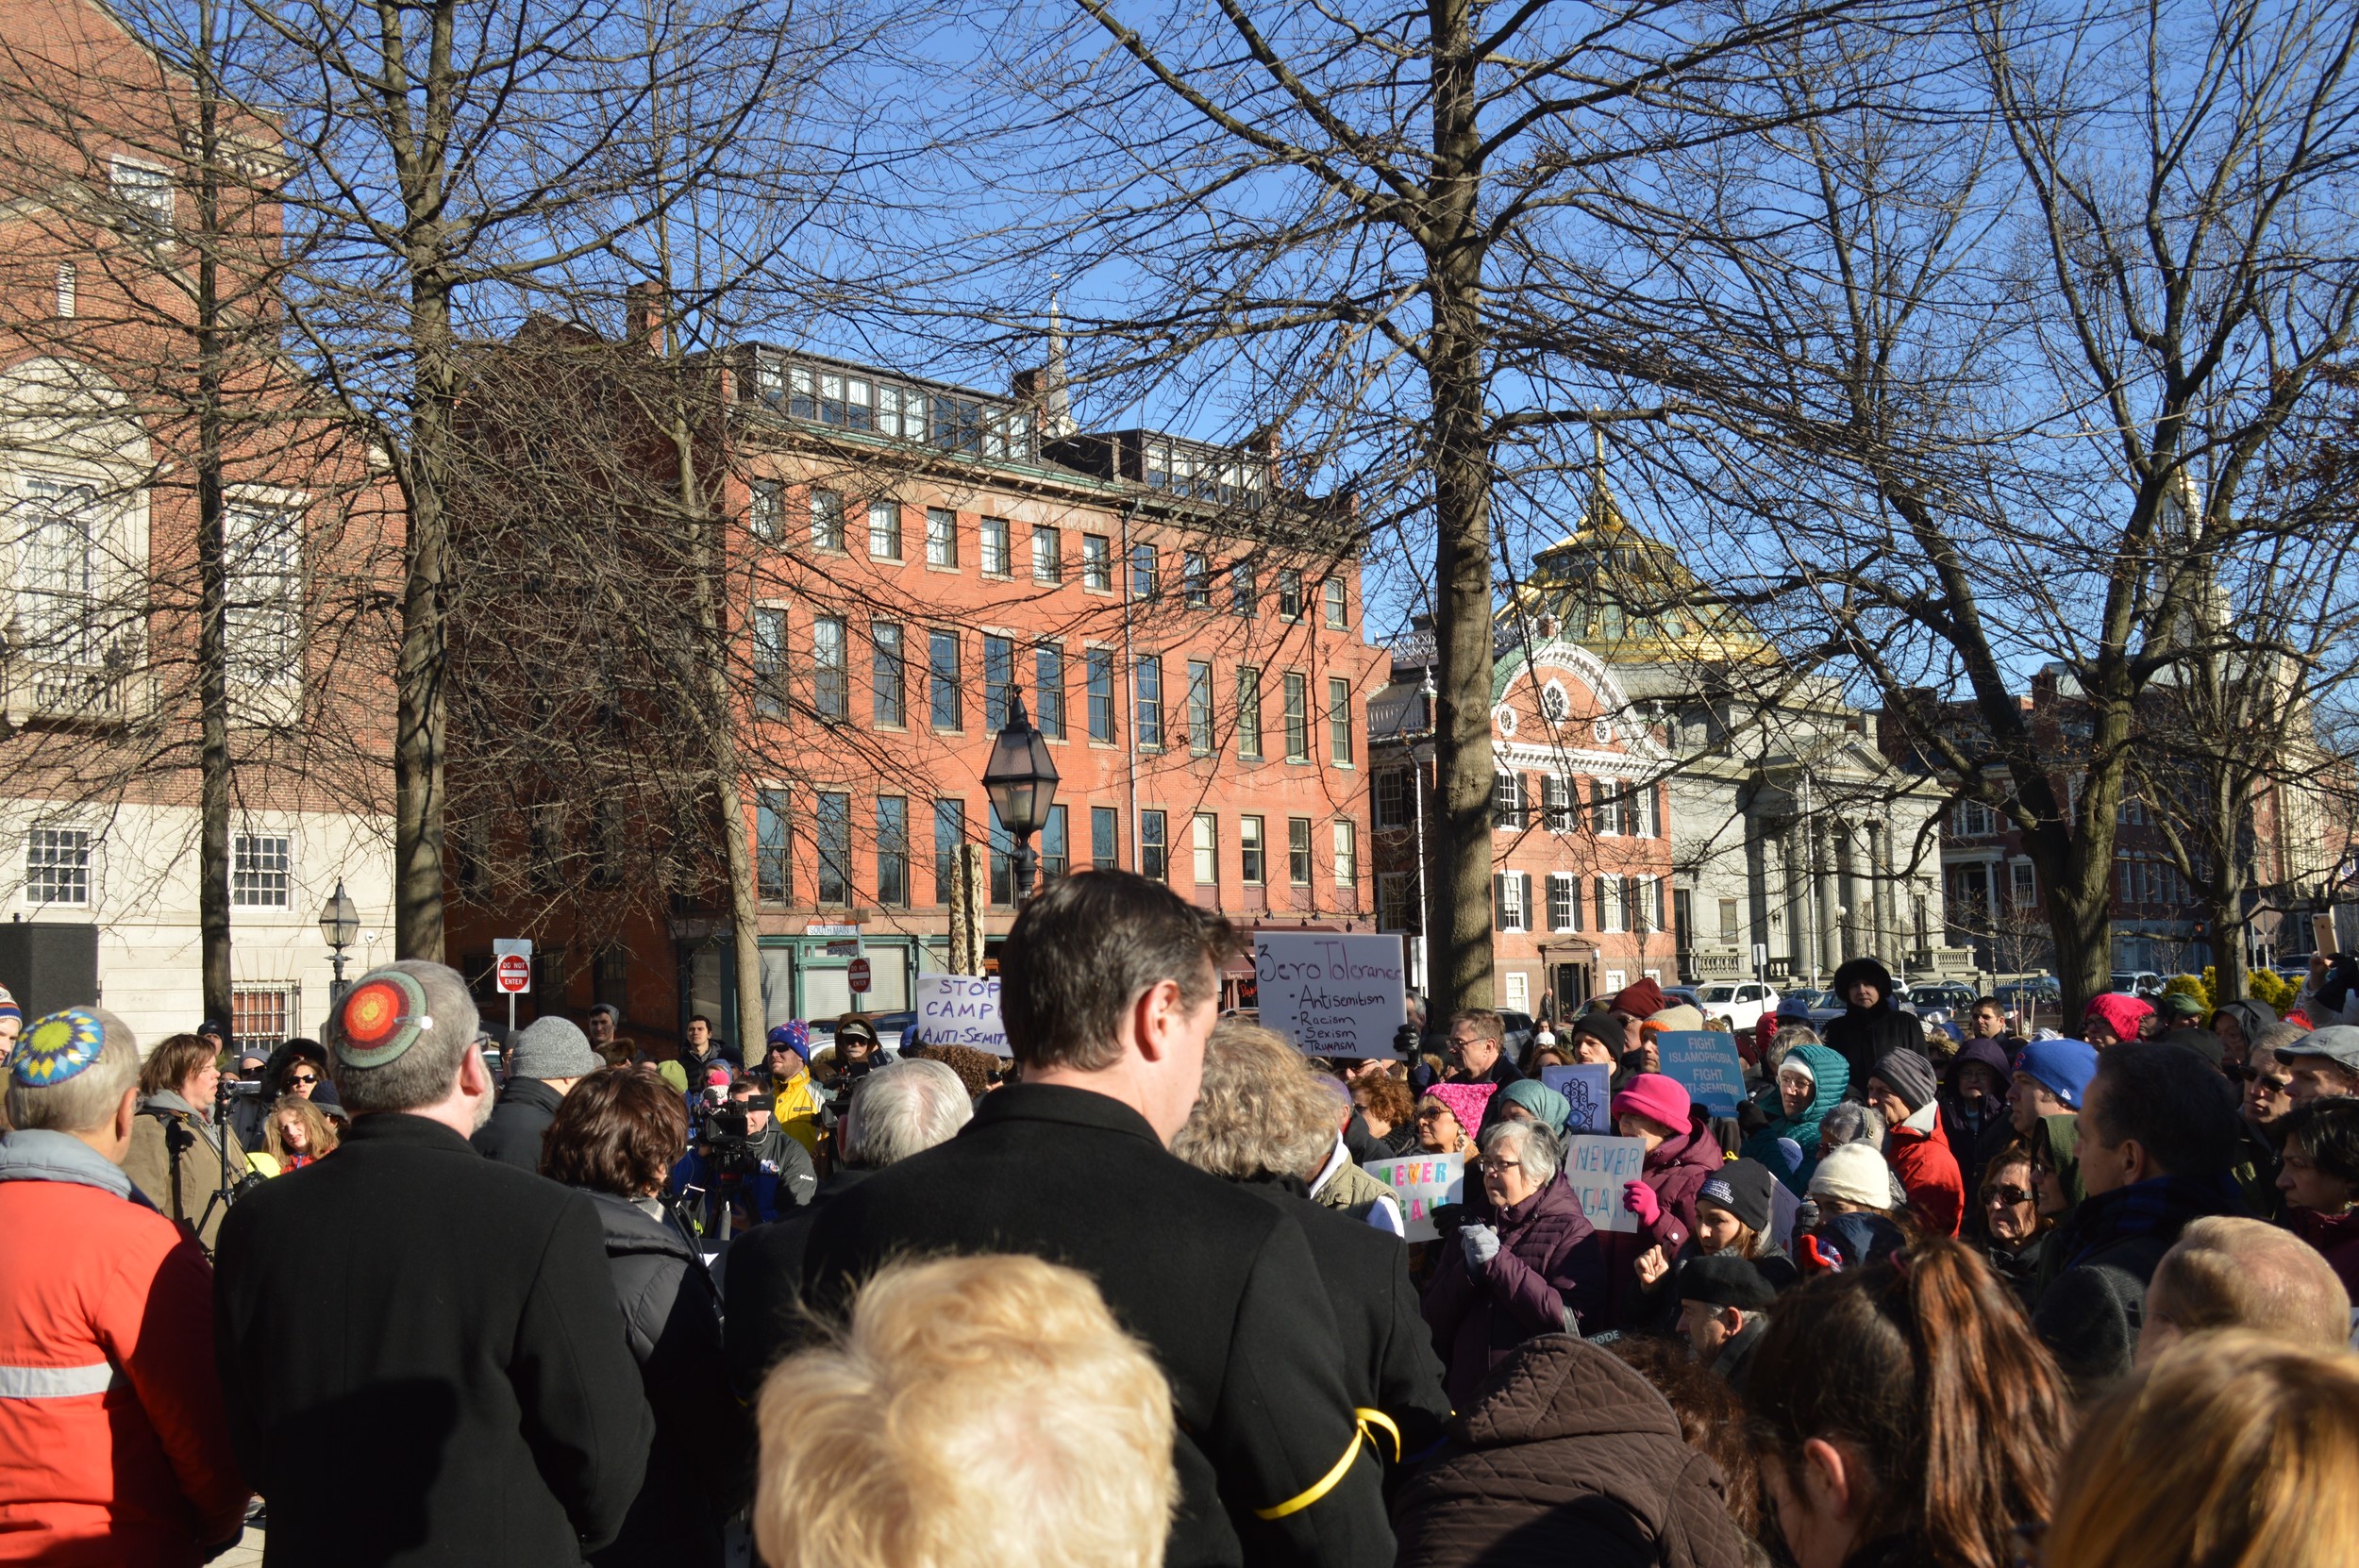 A crowd of about 300 listened to speakers Sunday afternoon at the vigil, "Never Again Means Never Again."